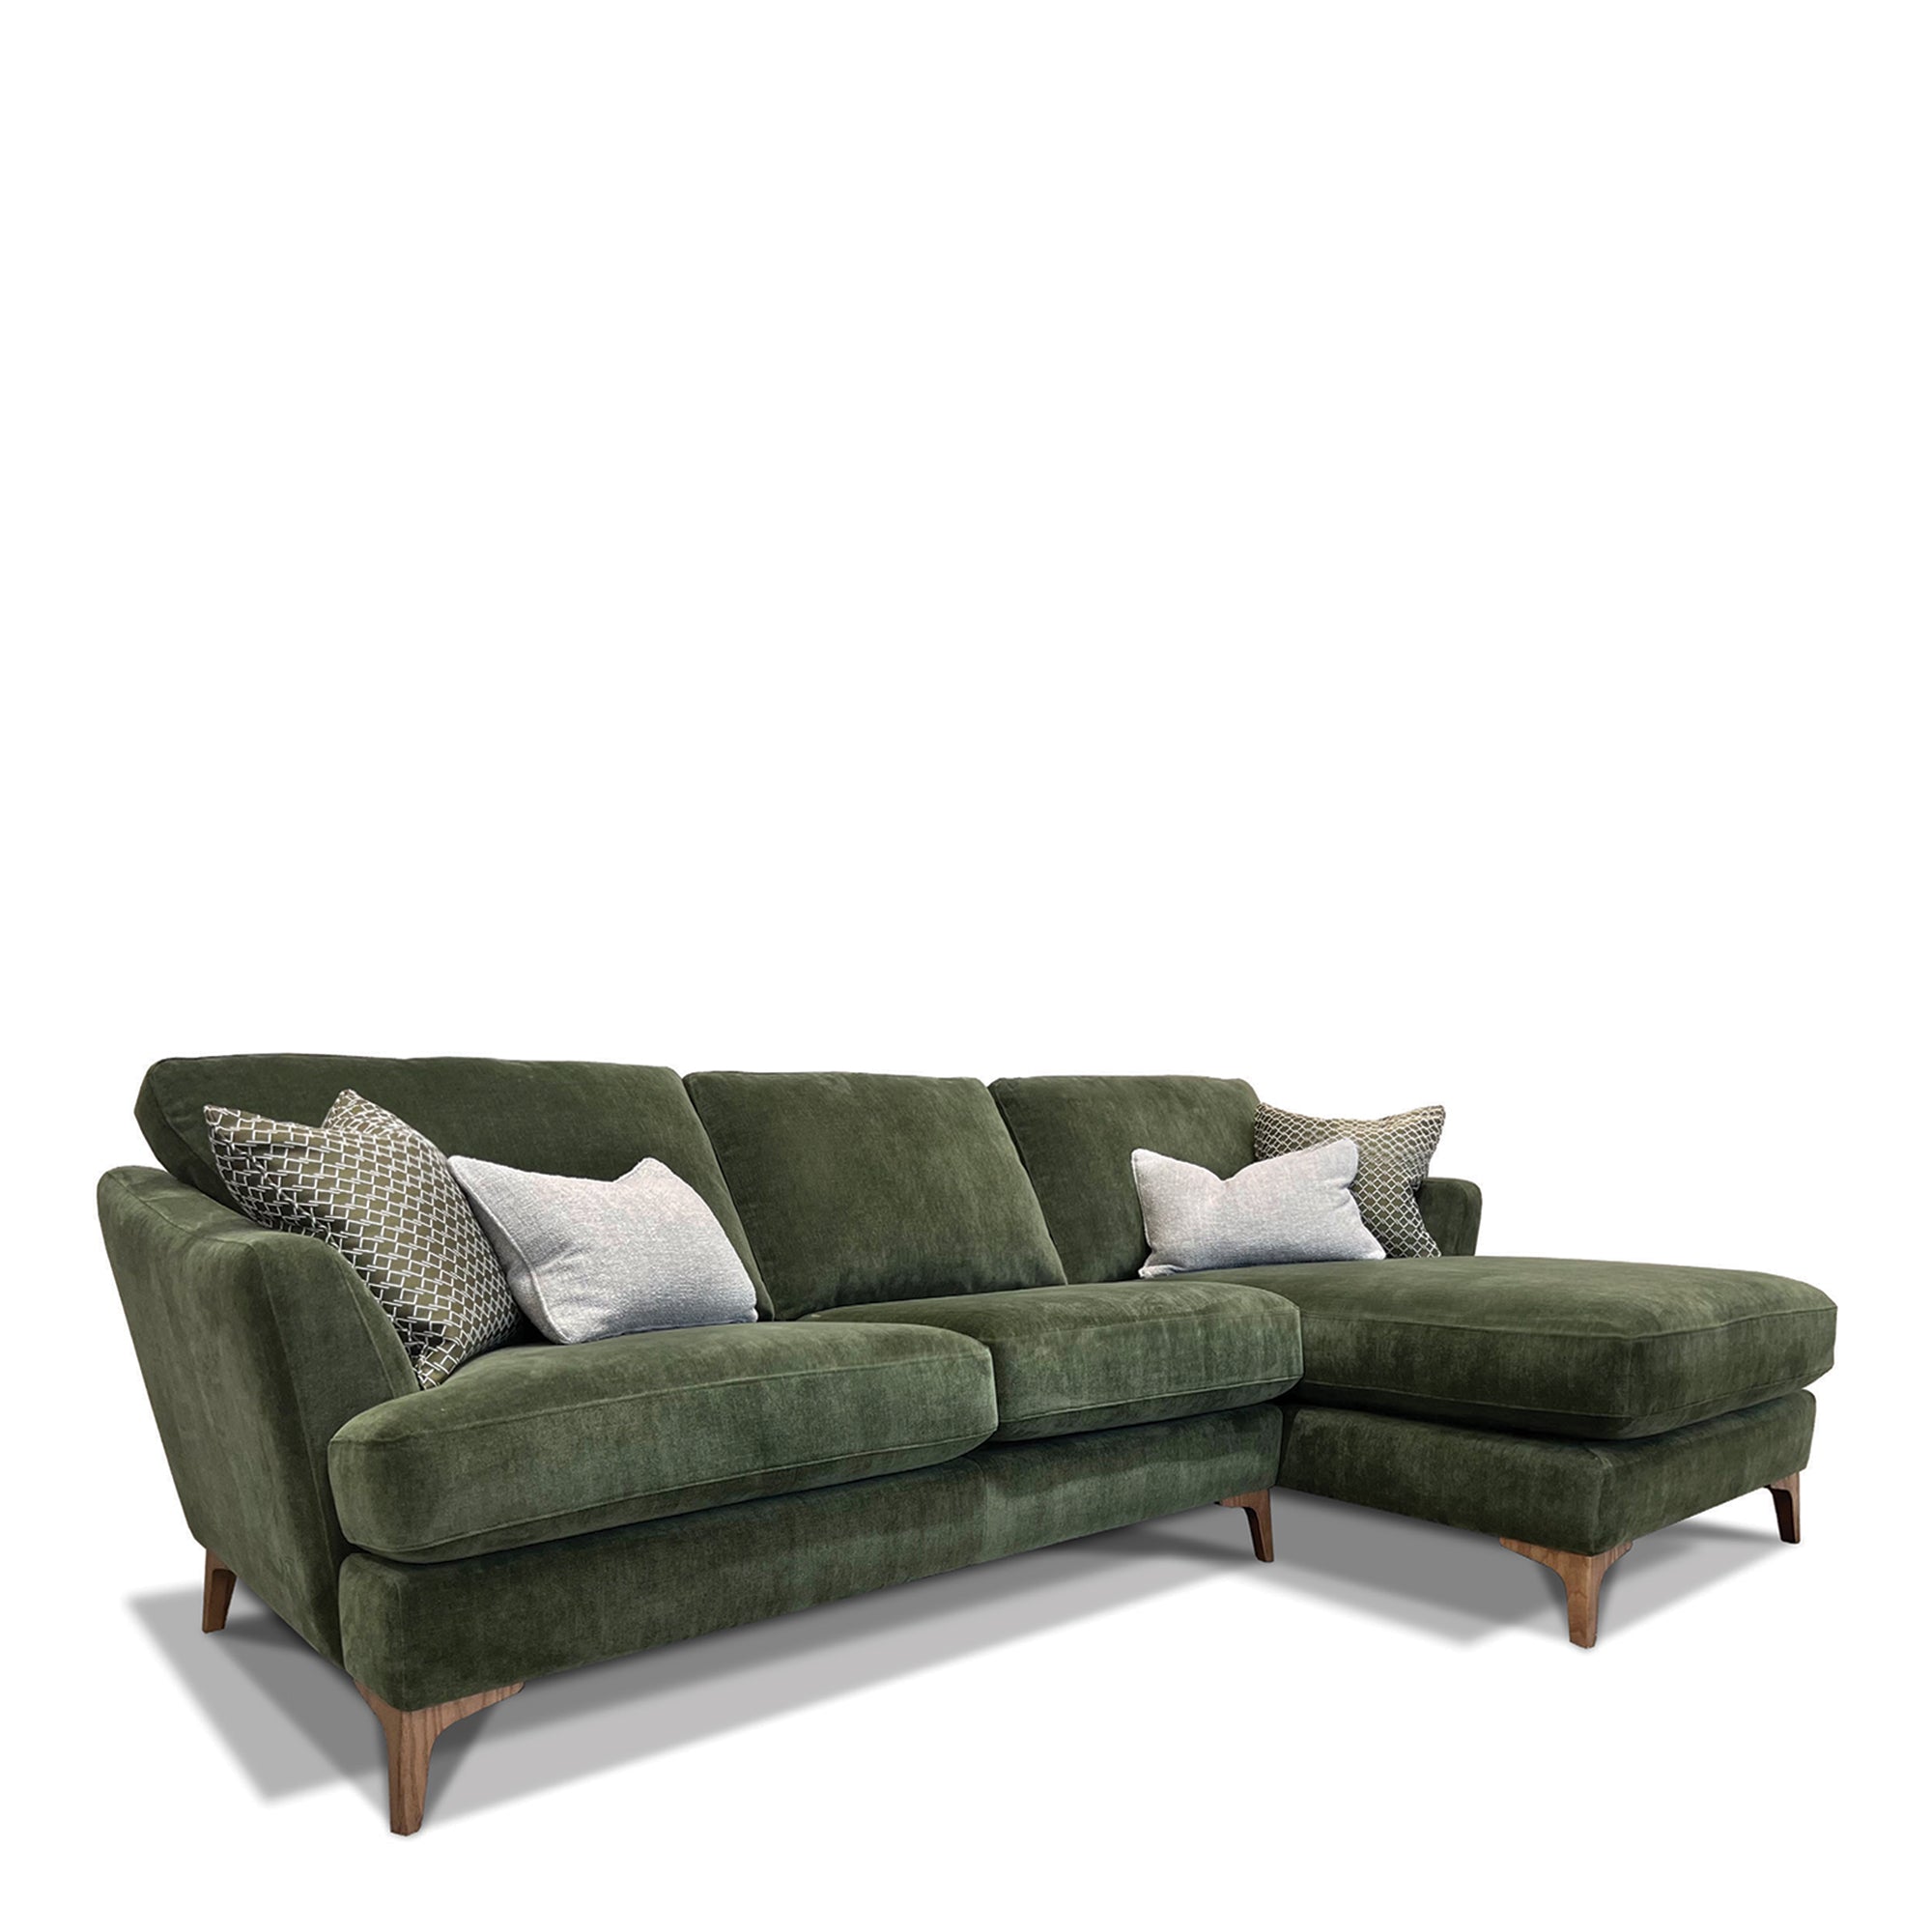 2 Seat Sofa LHF Arm With Chaise RHF Arm In Fabric